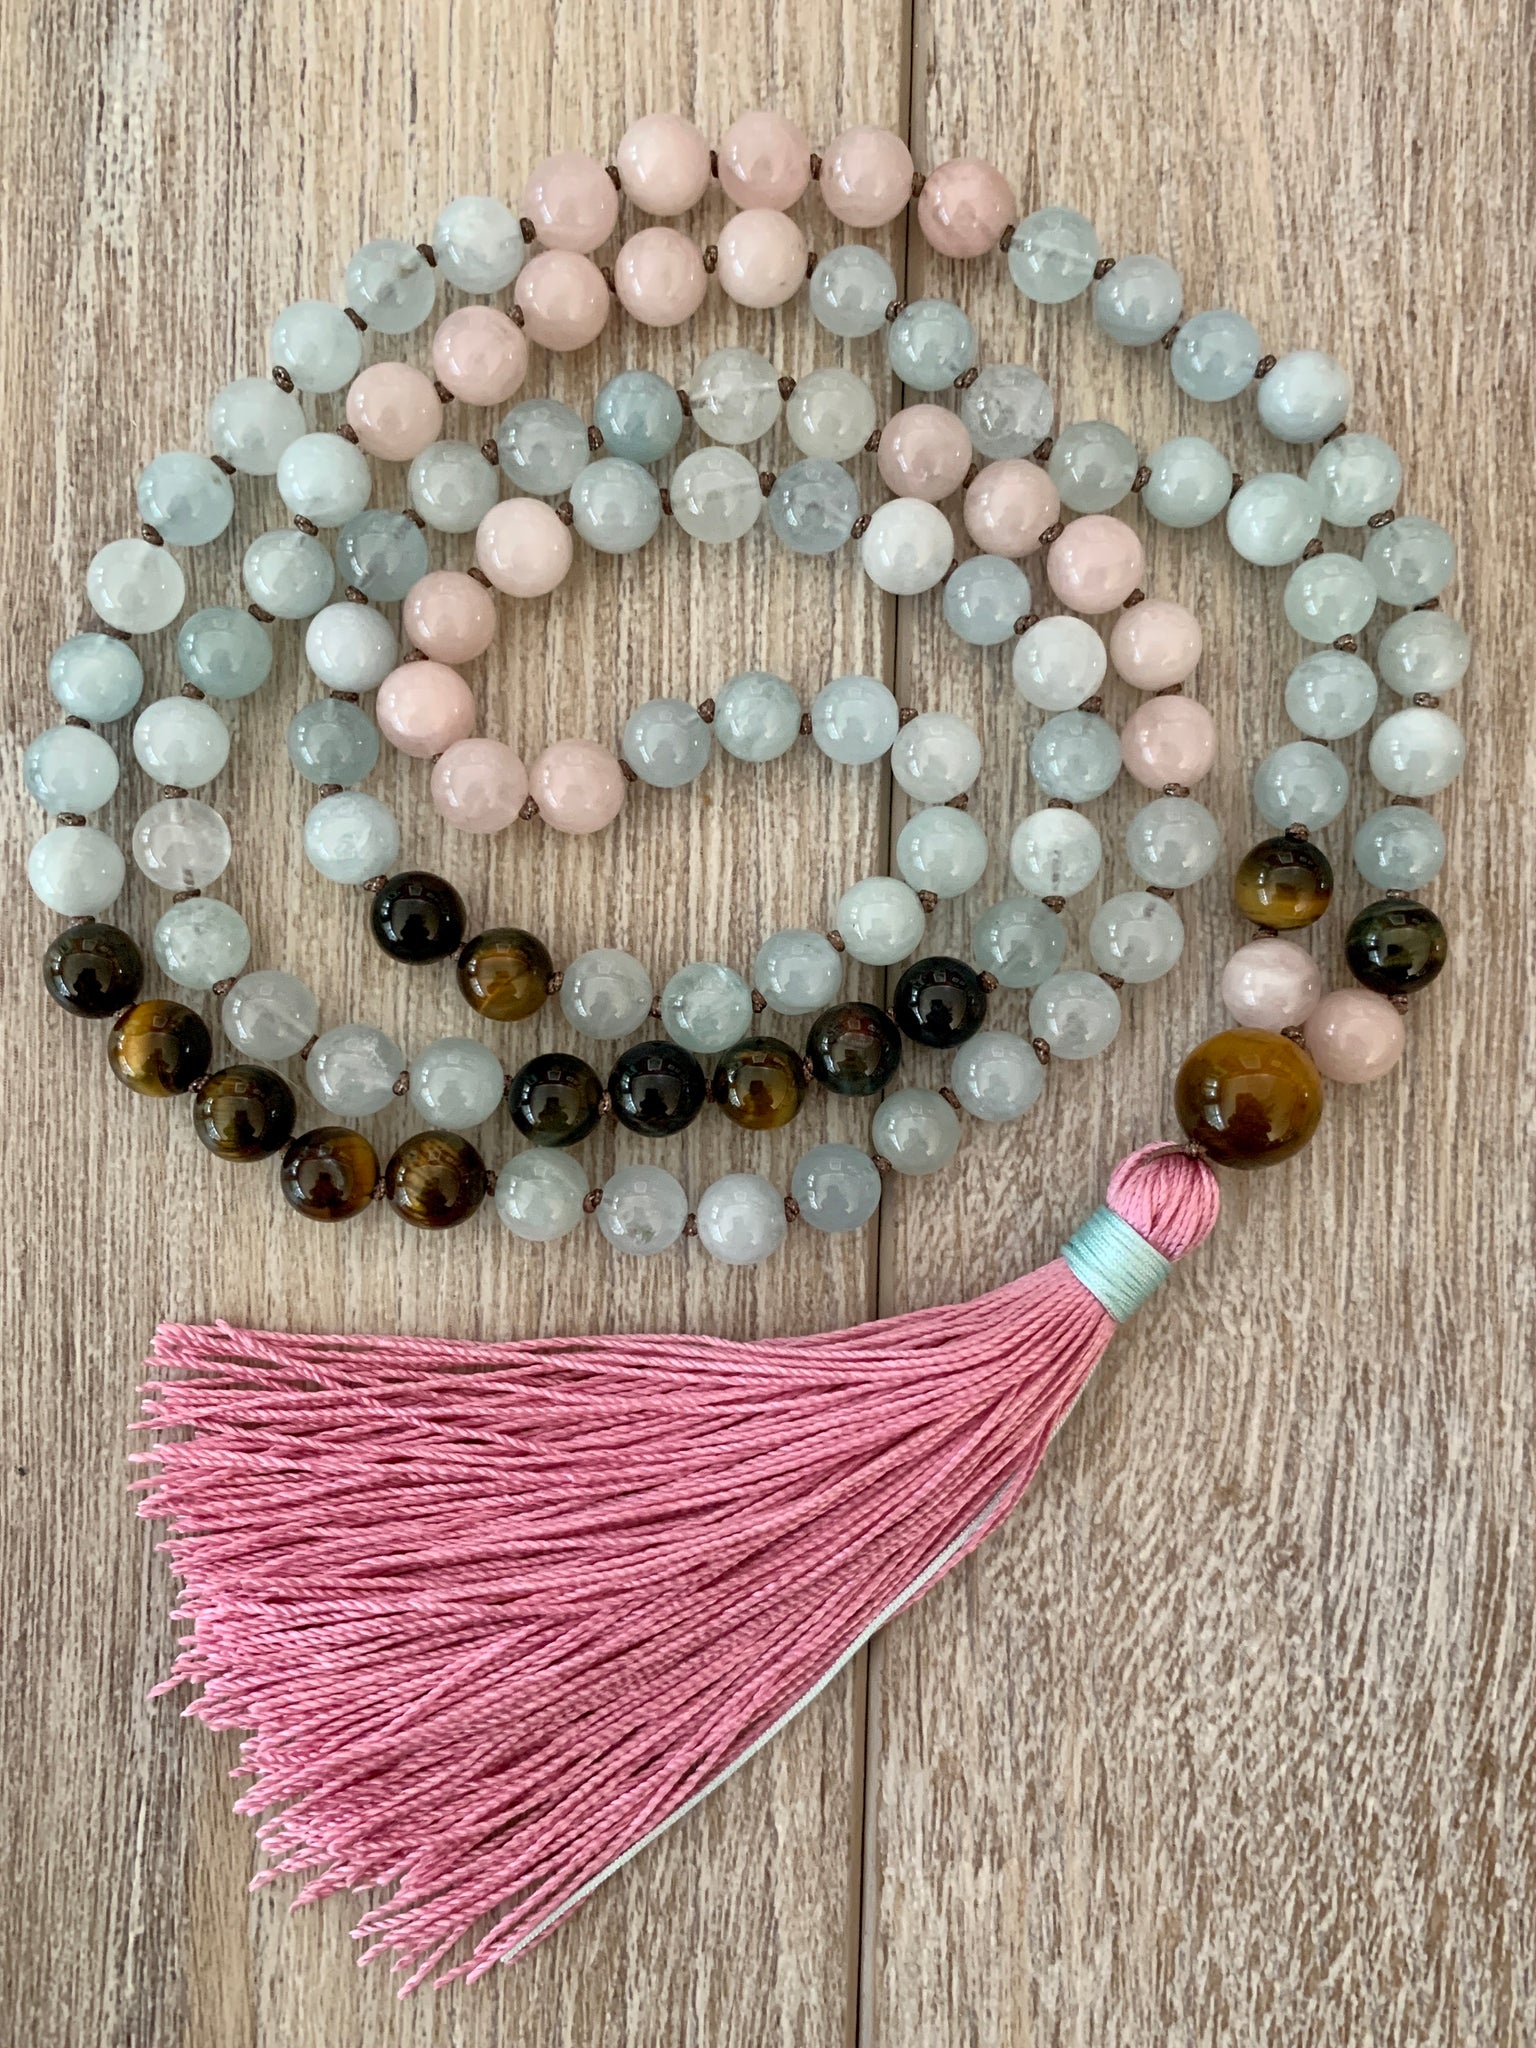 Love and Friendship Mala Necklace